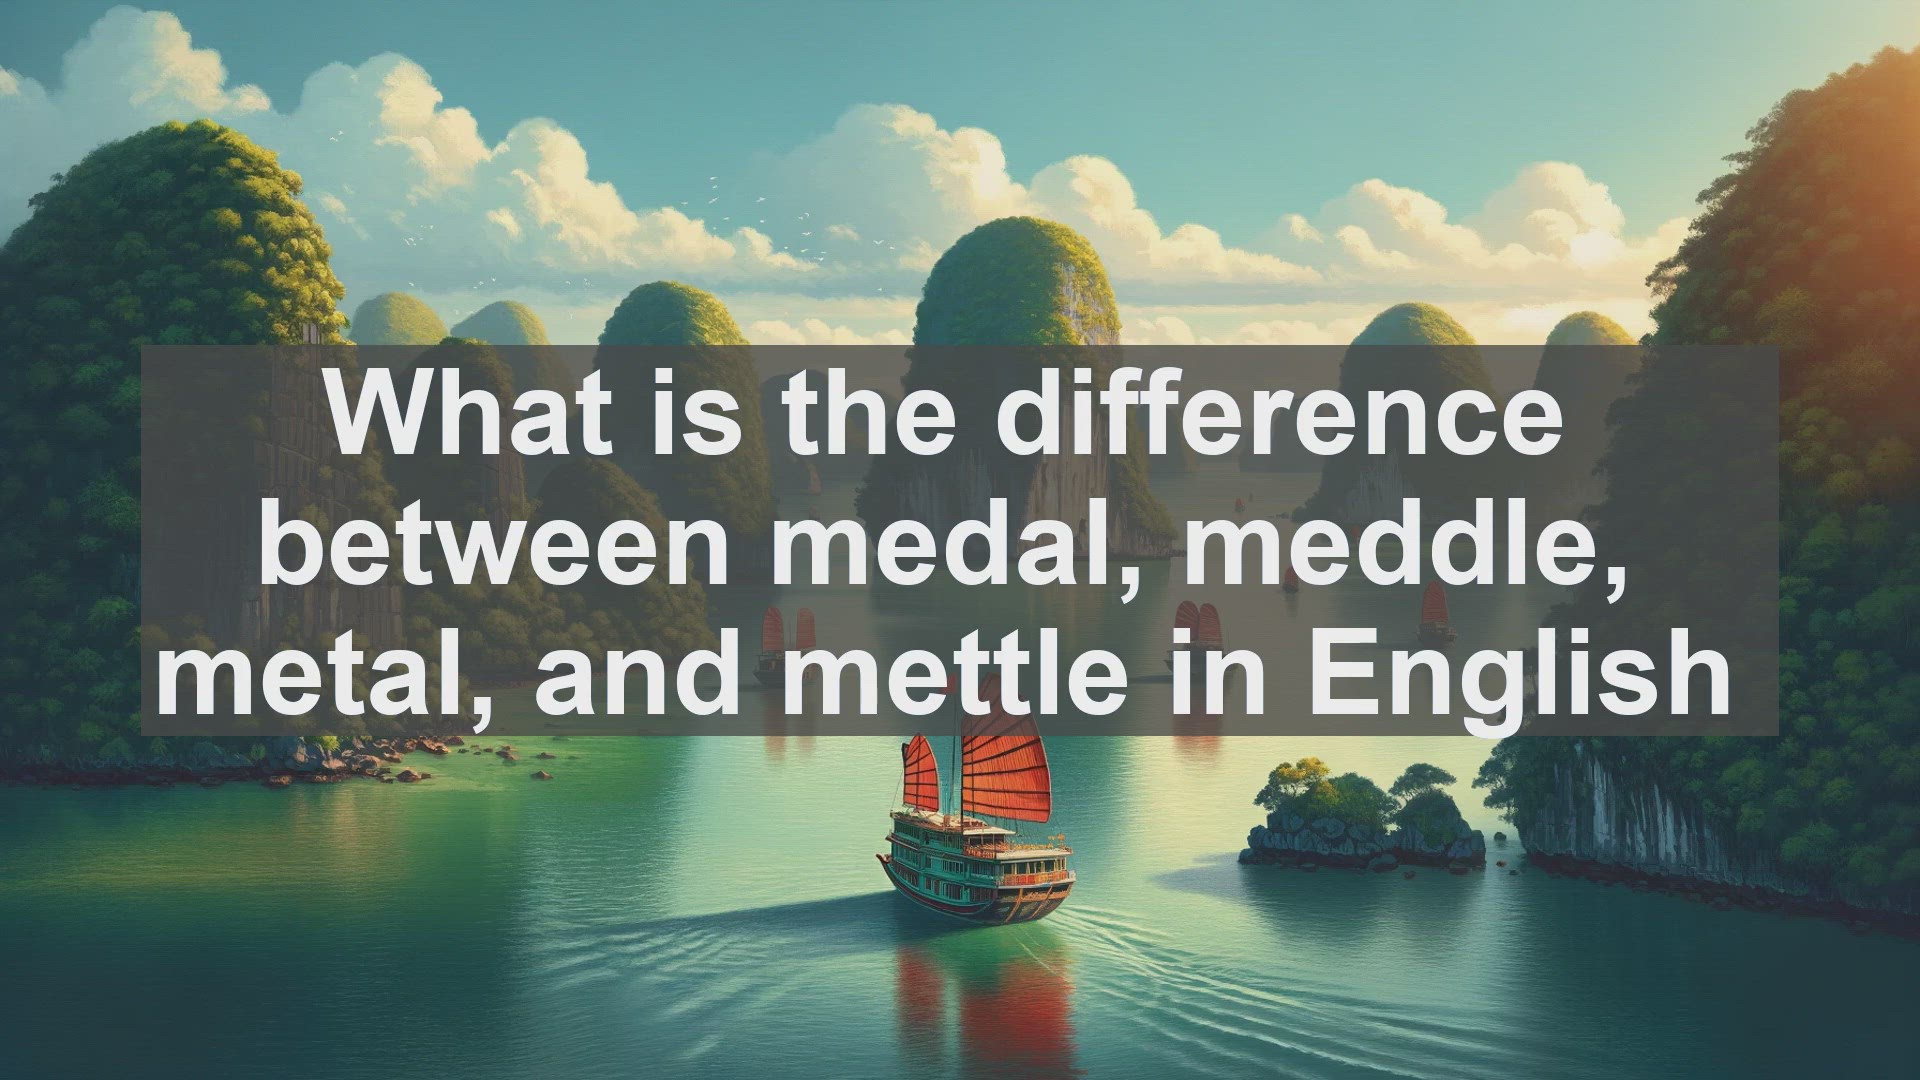 What is the difference between medal meddle metal and mettle in English?